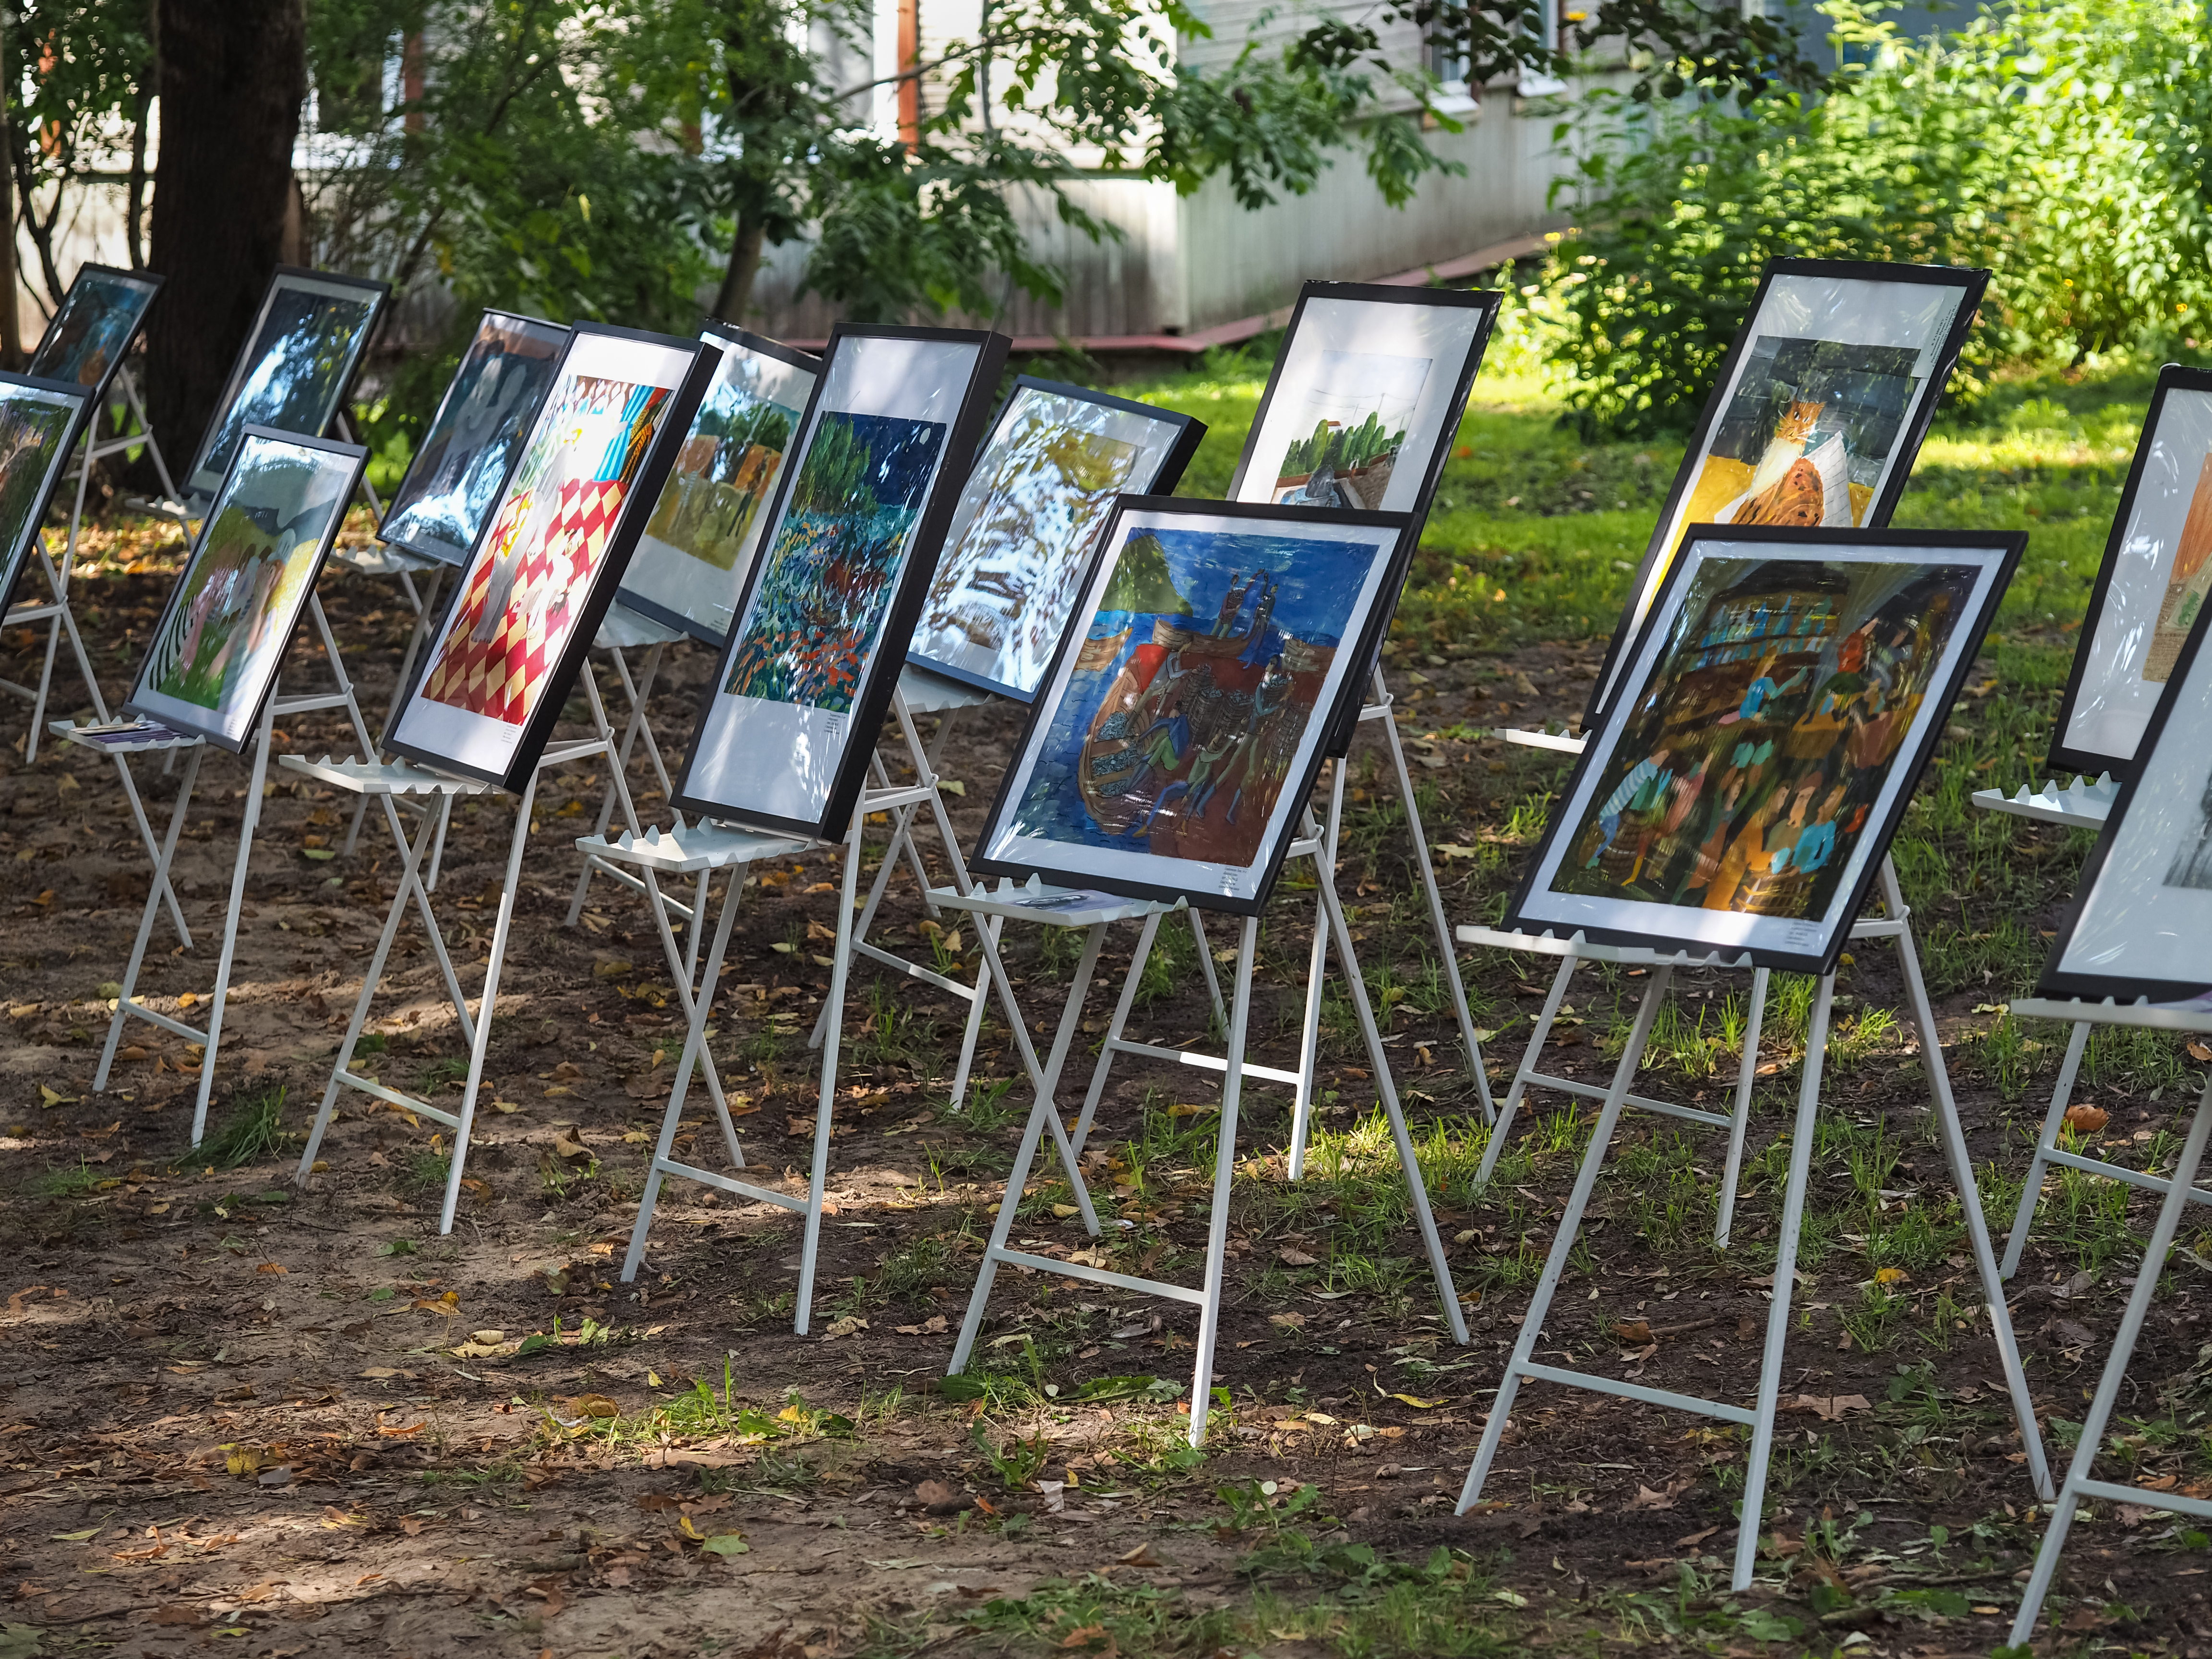 Exhibition of paintings in the yard | Source: Shutterstock